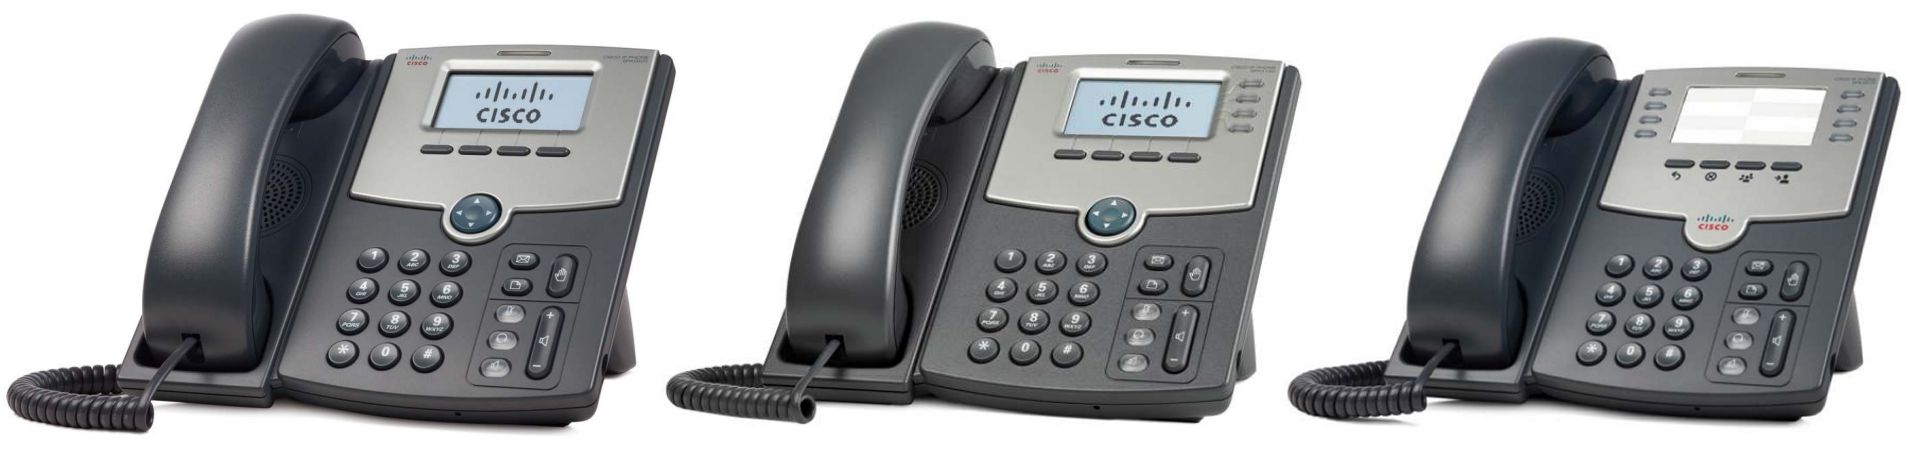 Product Image of Cisco Small Business SPA500 Series IP Phones